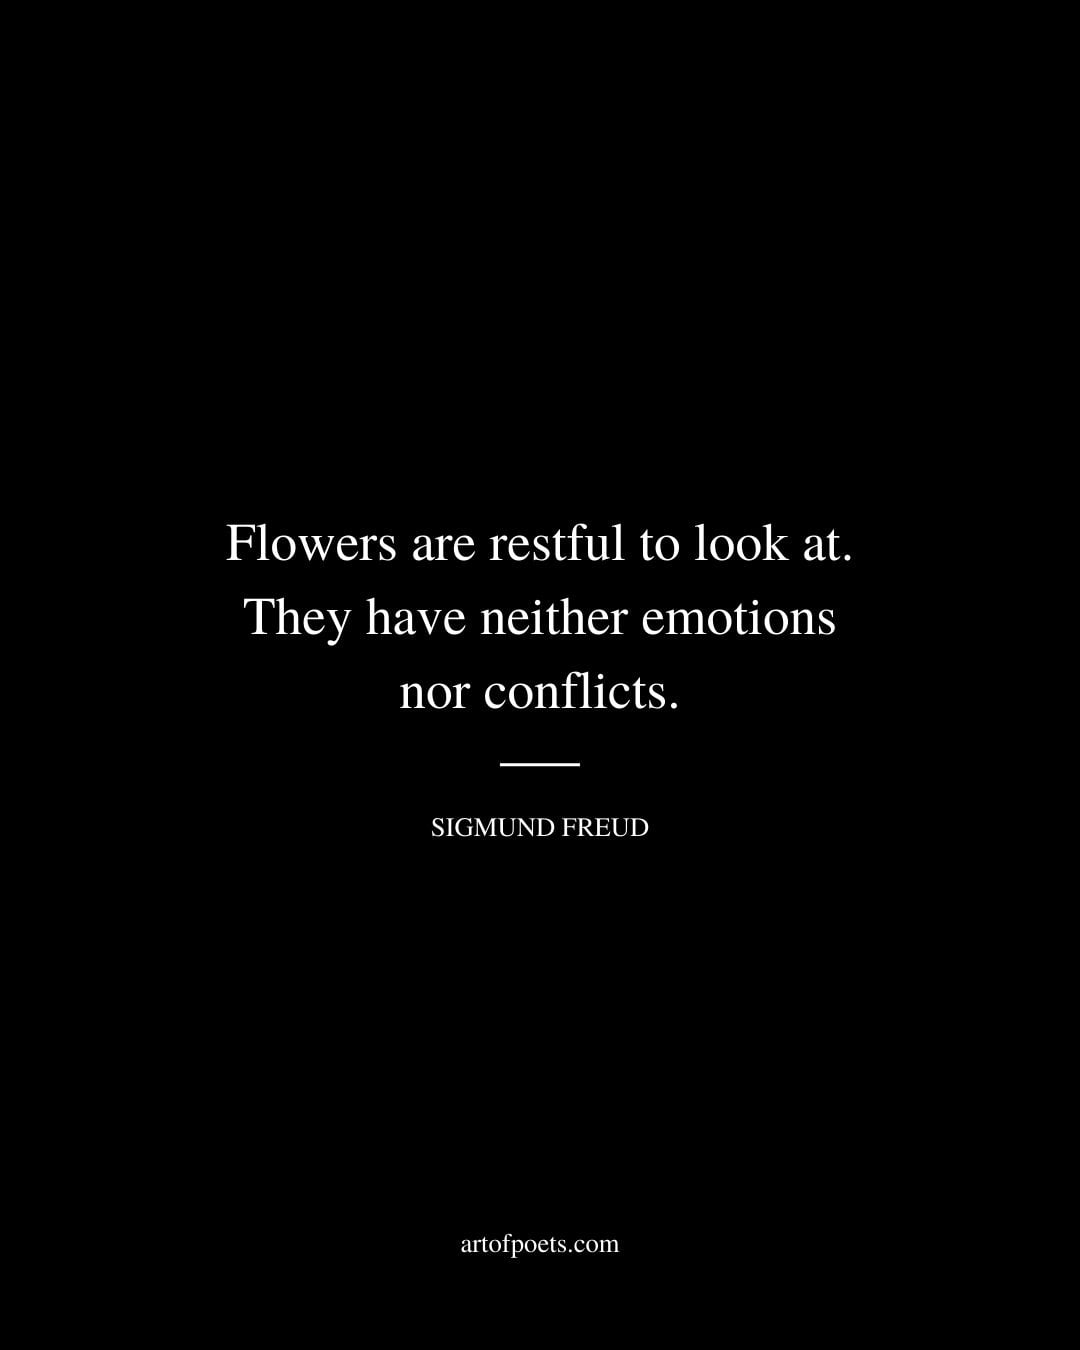 Flowers are restful to look at. They have neither emotions nor conflicts. – Sigmund Freud